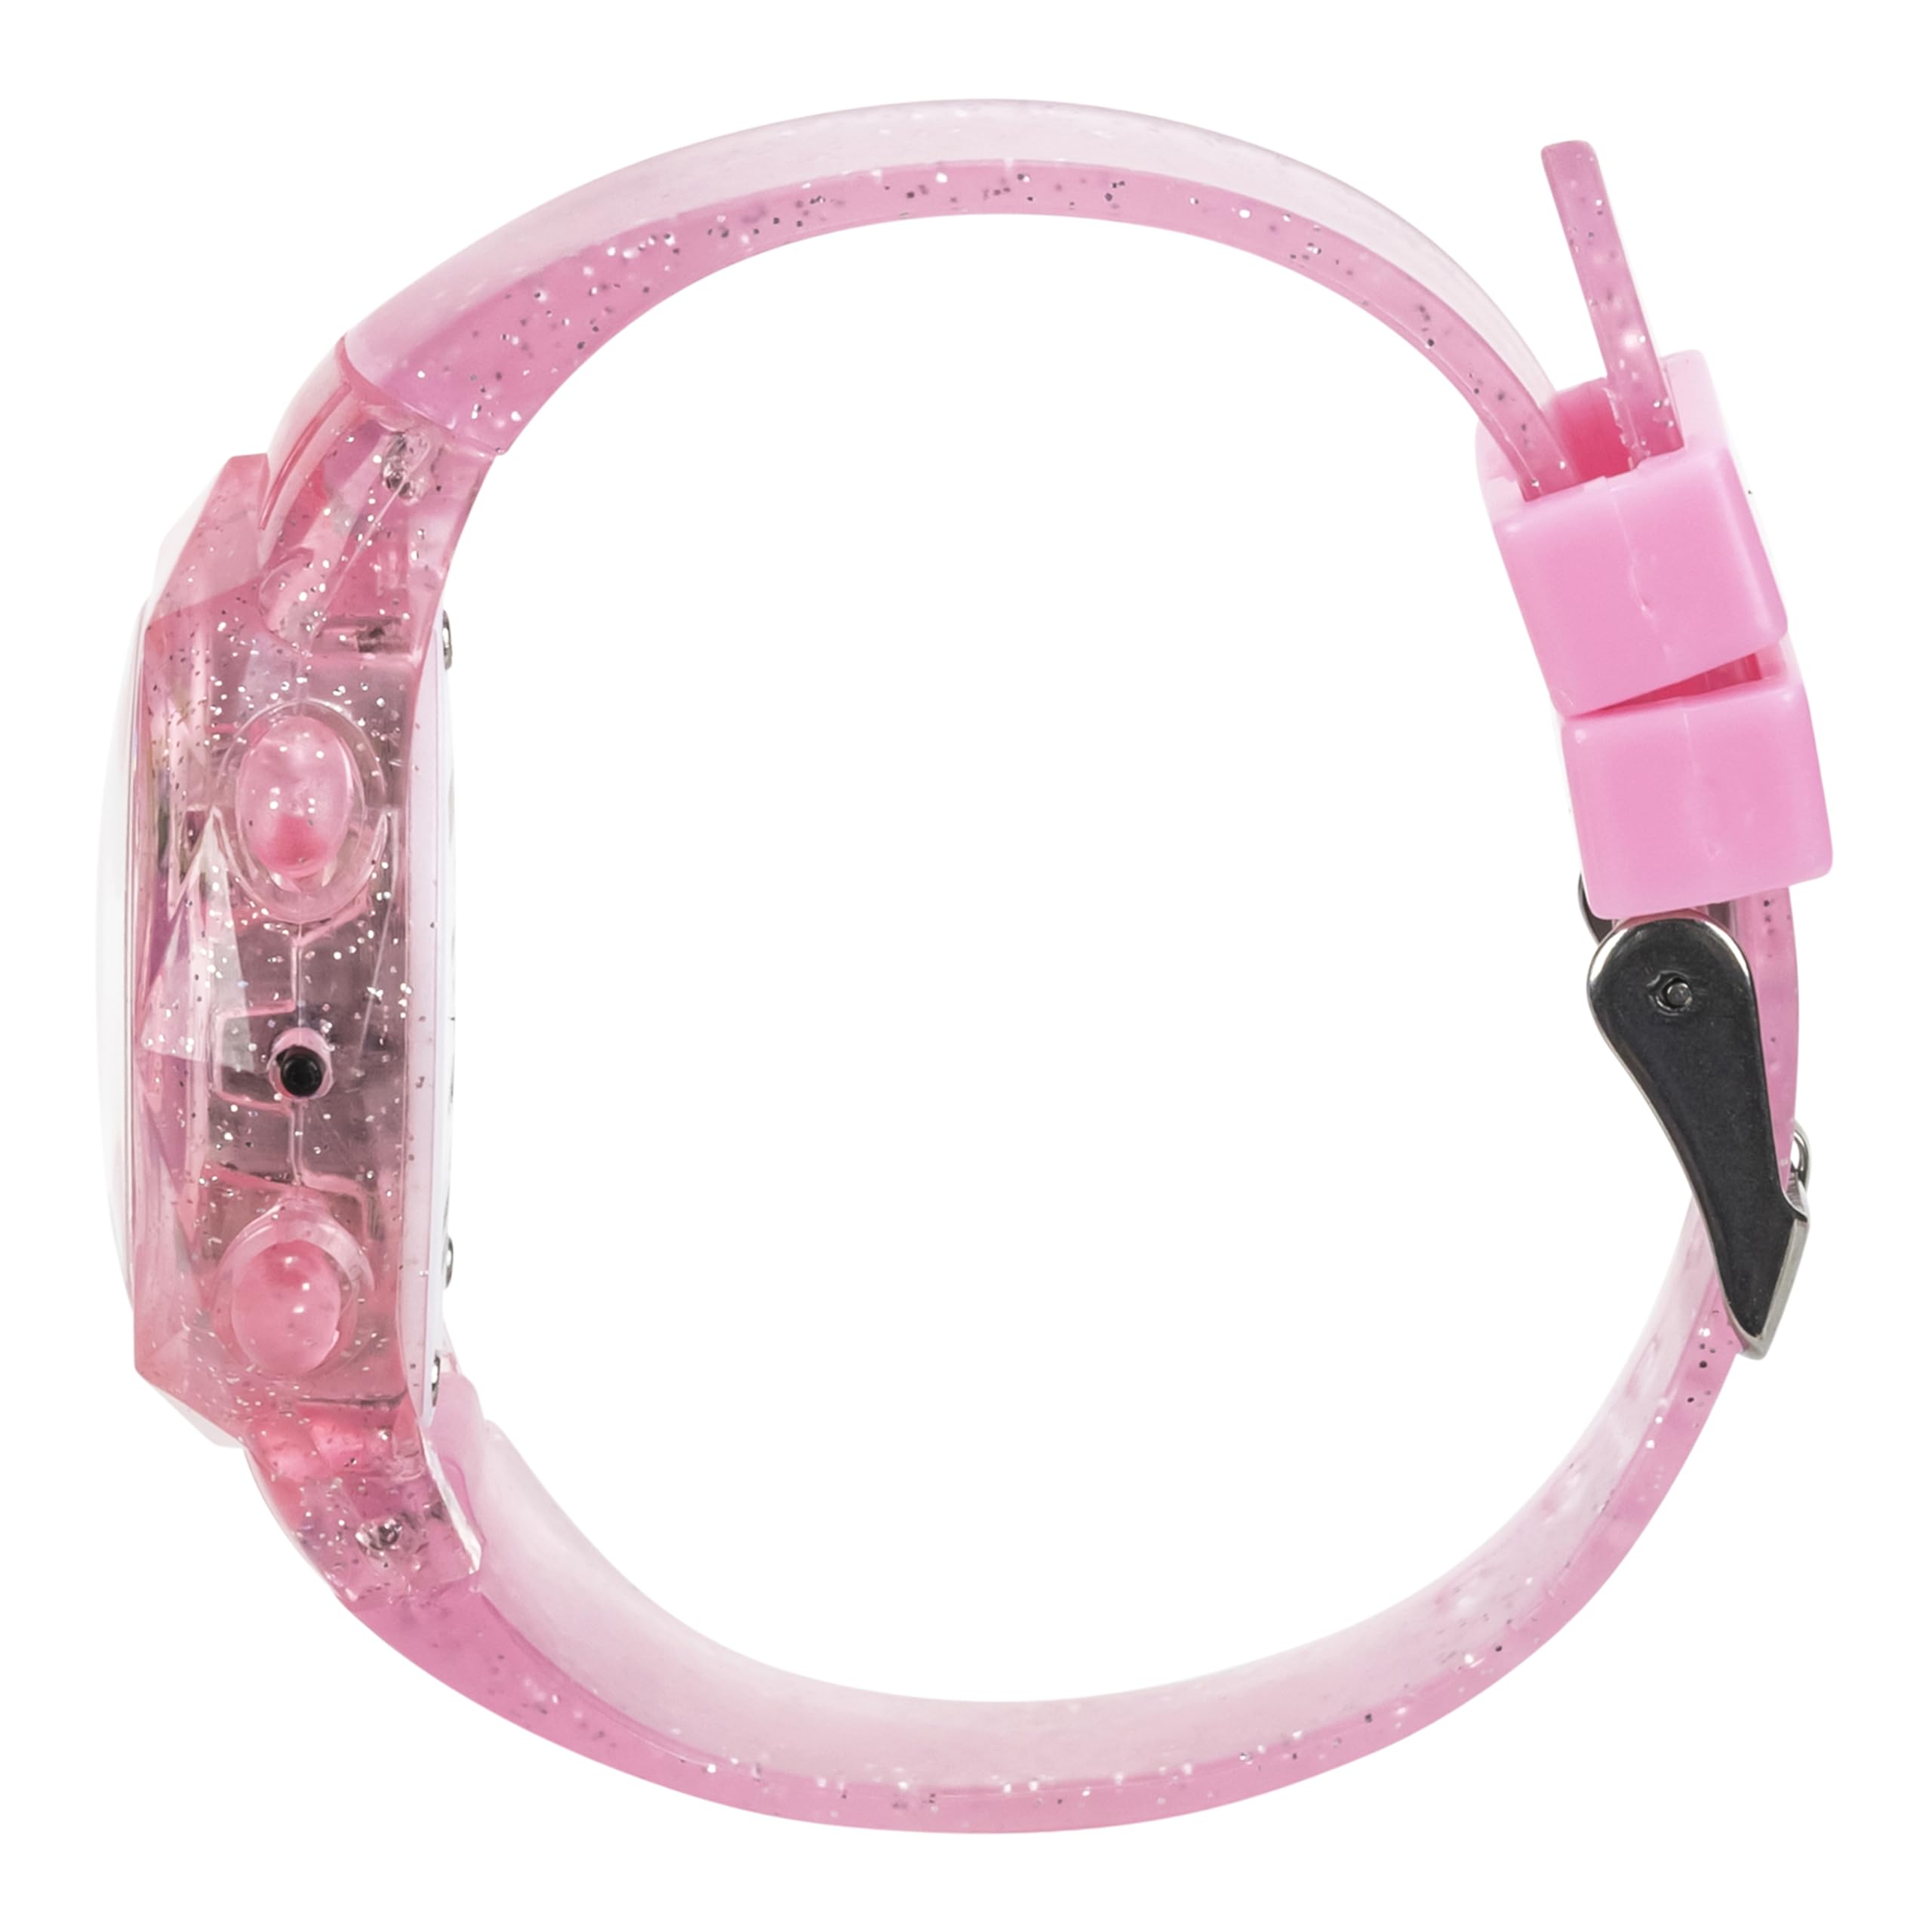 Accutime Hello Kitty Digital LCD Quartz Kids Pink Watch for Girls with Pink Glitter Hello Kitty and Friends Band Strap (Model: HK4168AZ)